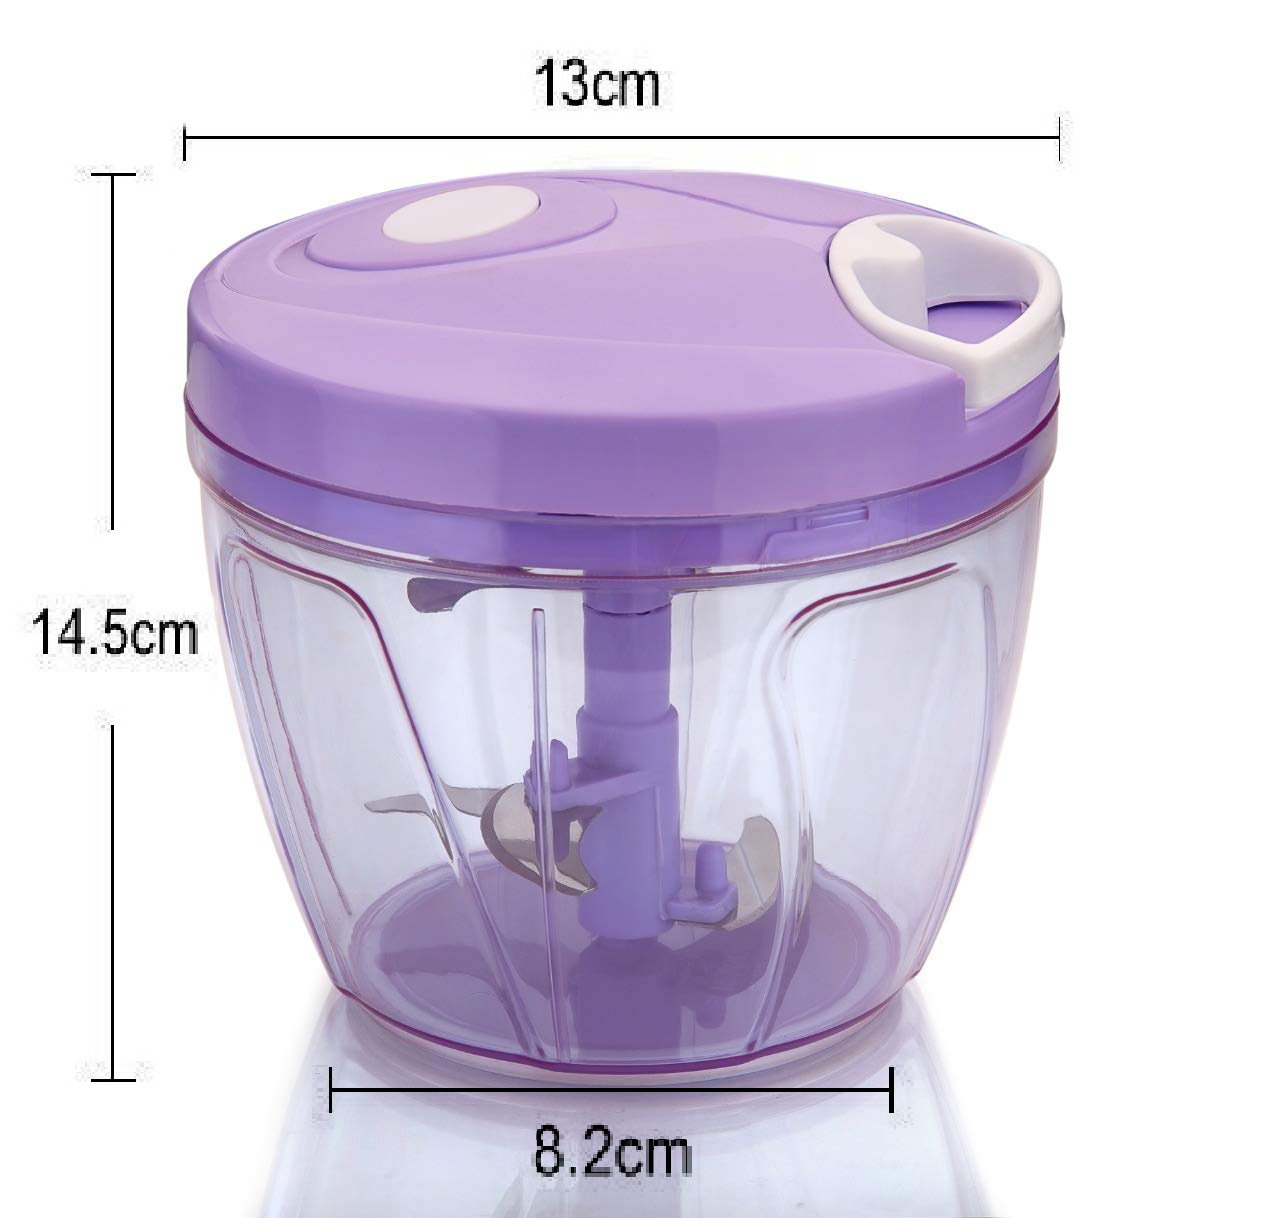 2180 Manual 2in1 Handy 1 Litre Plastic Dori Chopper, Cutter with SS Blades and Whisker Blade (1000 ml) - SkyShopy